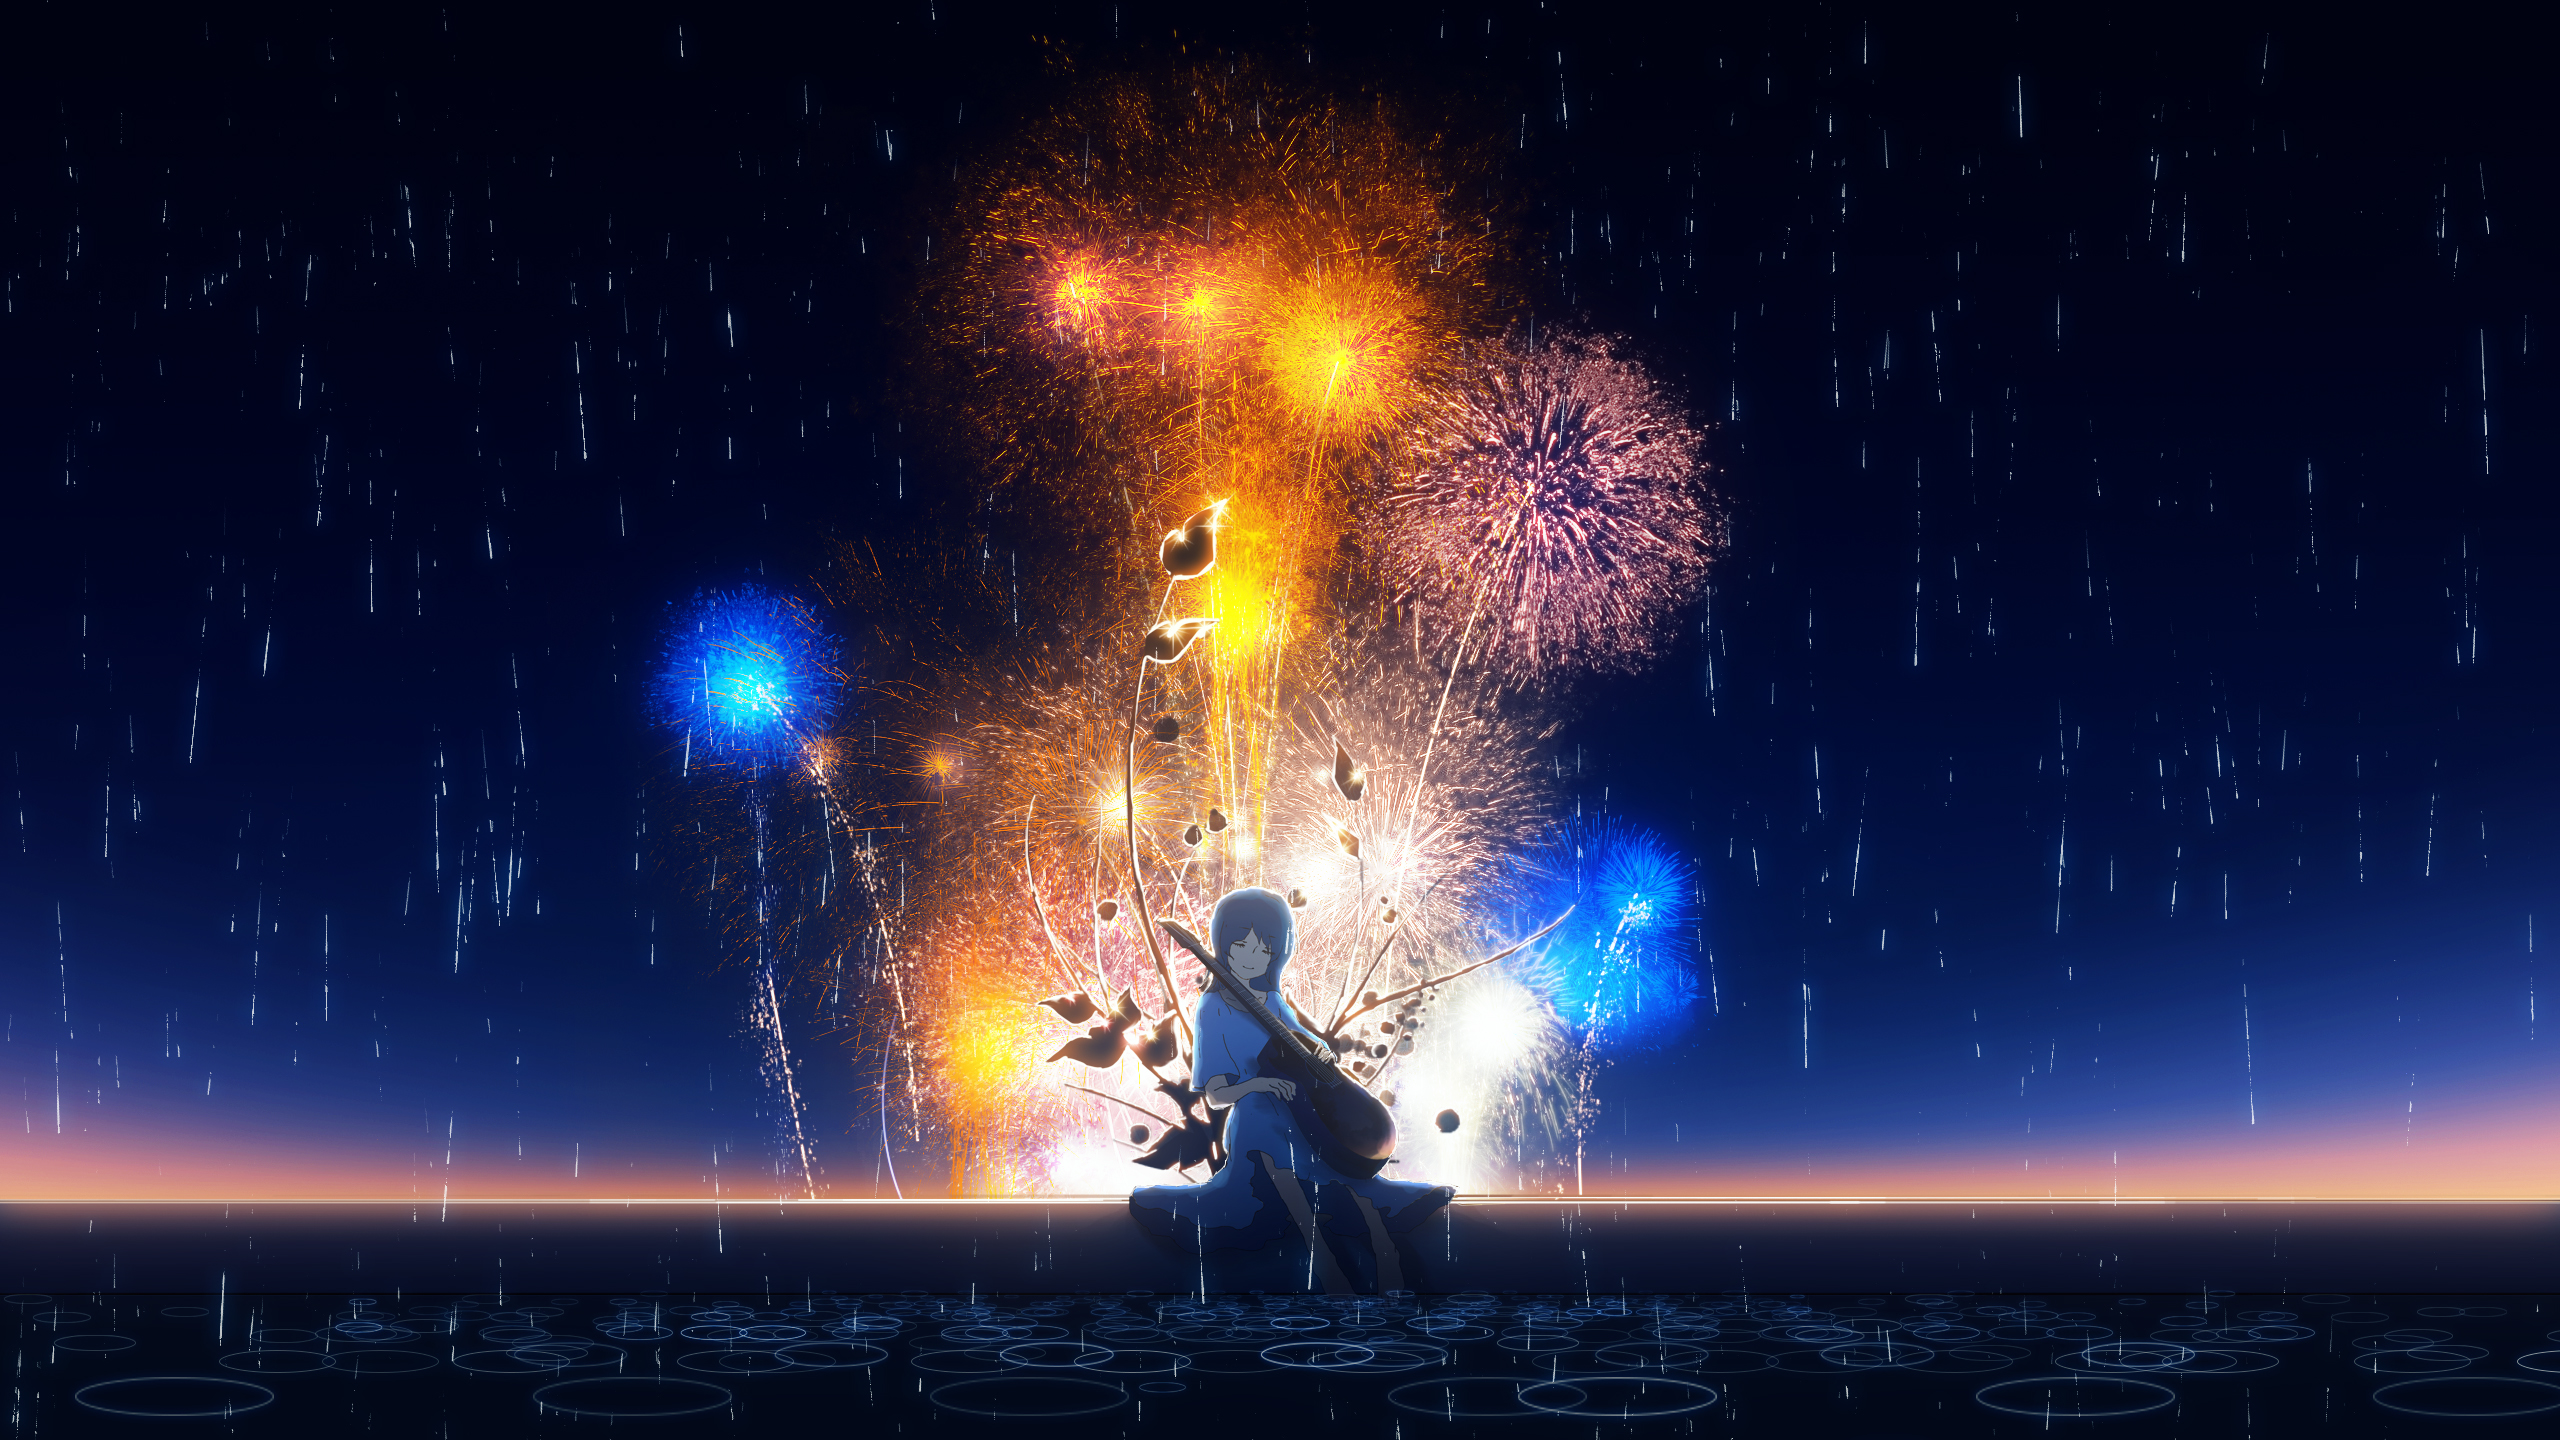 An Anime Couples of Lovers Seeing the Fireworks on a Rooftop, Anime Style,  Colorful, Wallpaper, T-shirt Art, Design Stock Image - Image of couples,  lovers: 294712319